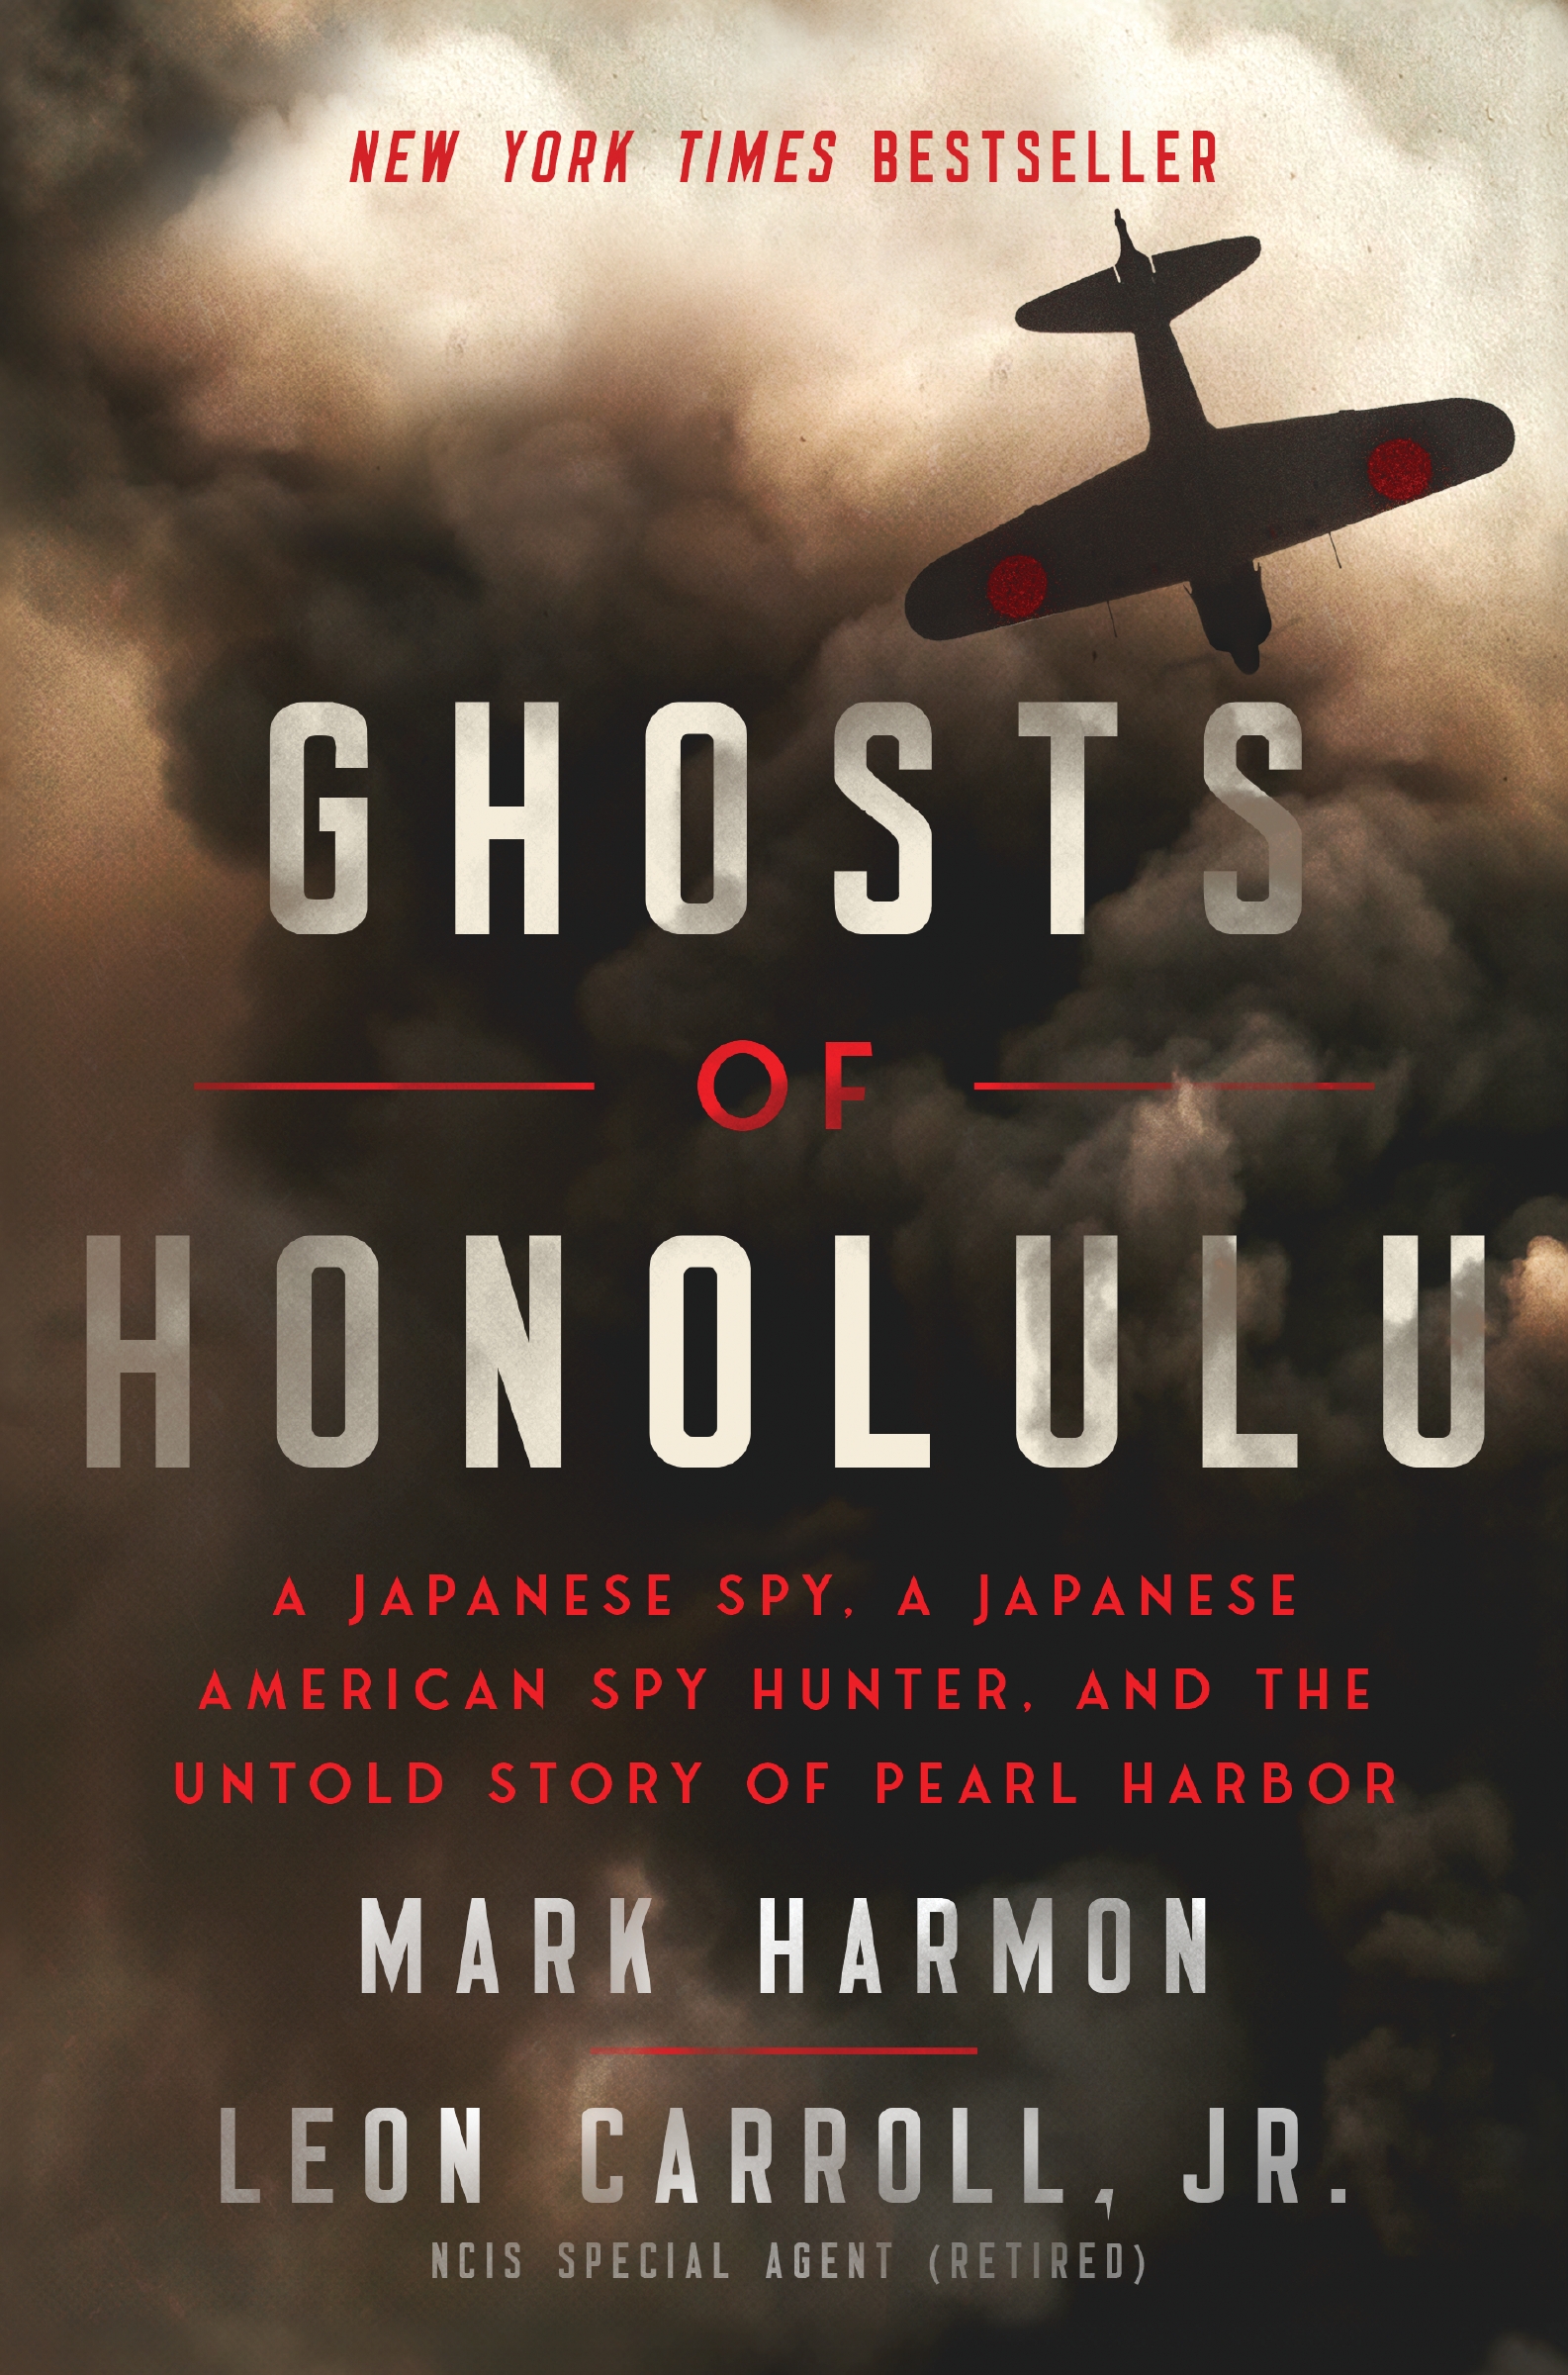 Ghosts of Honolulu A Japanese Spy, A Japanese American Spy Hunter, and the Untold Story of Pearl Harbor cover image